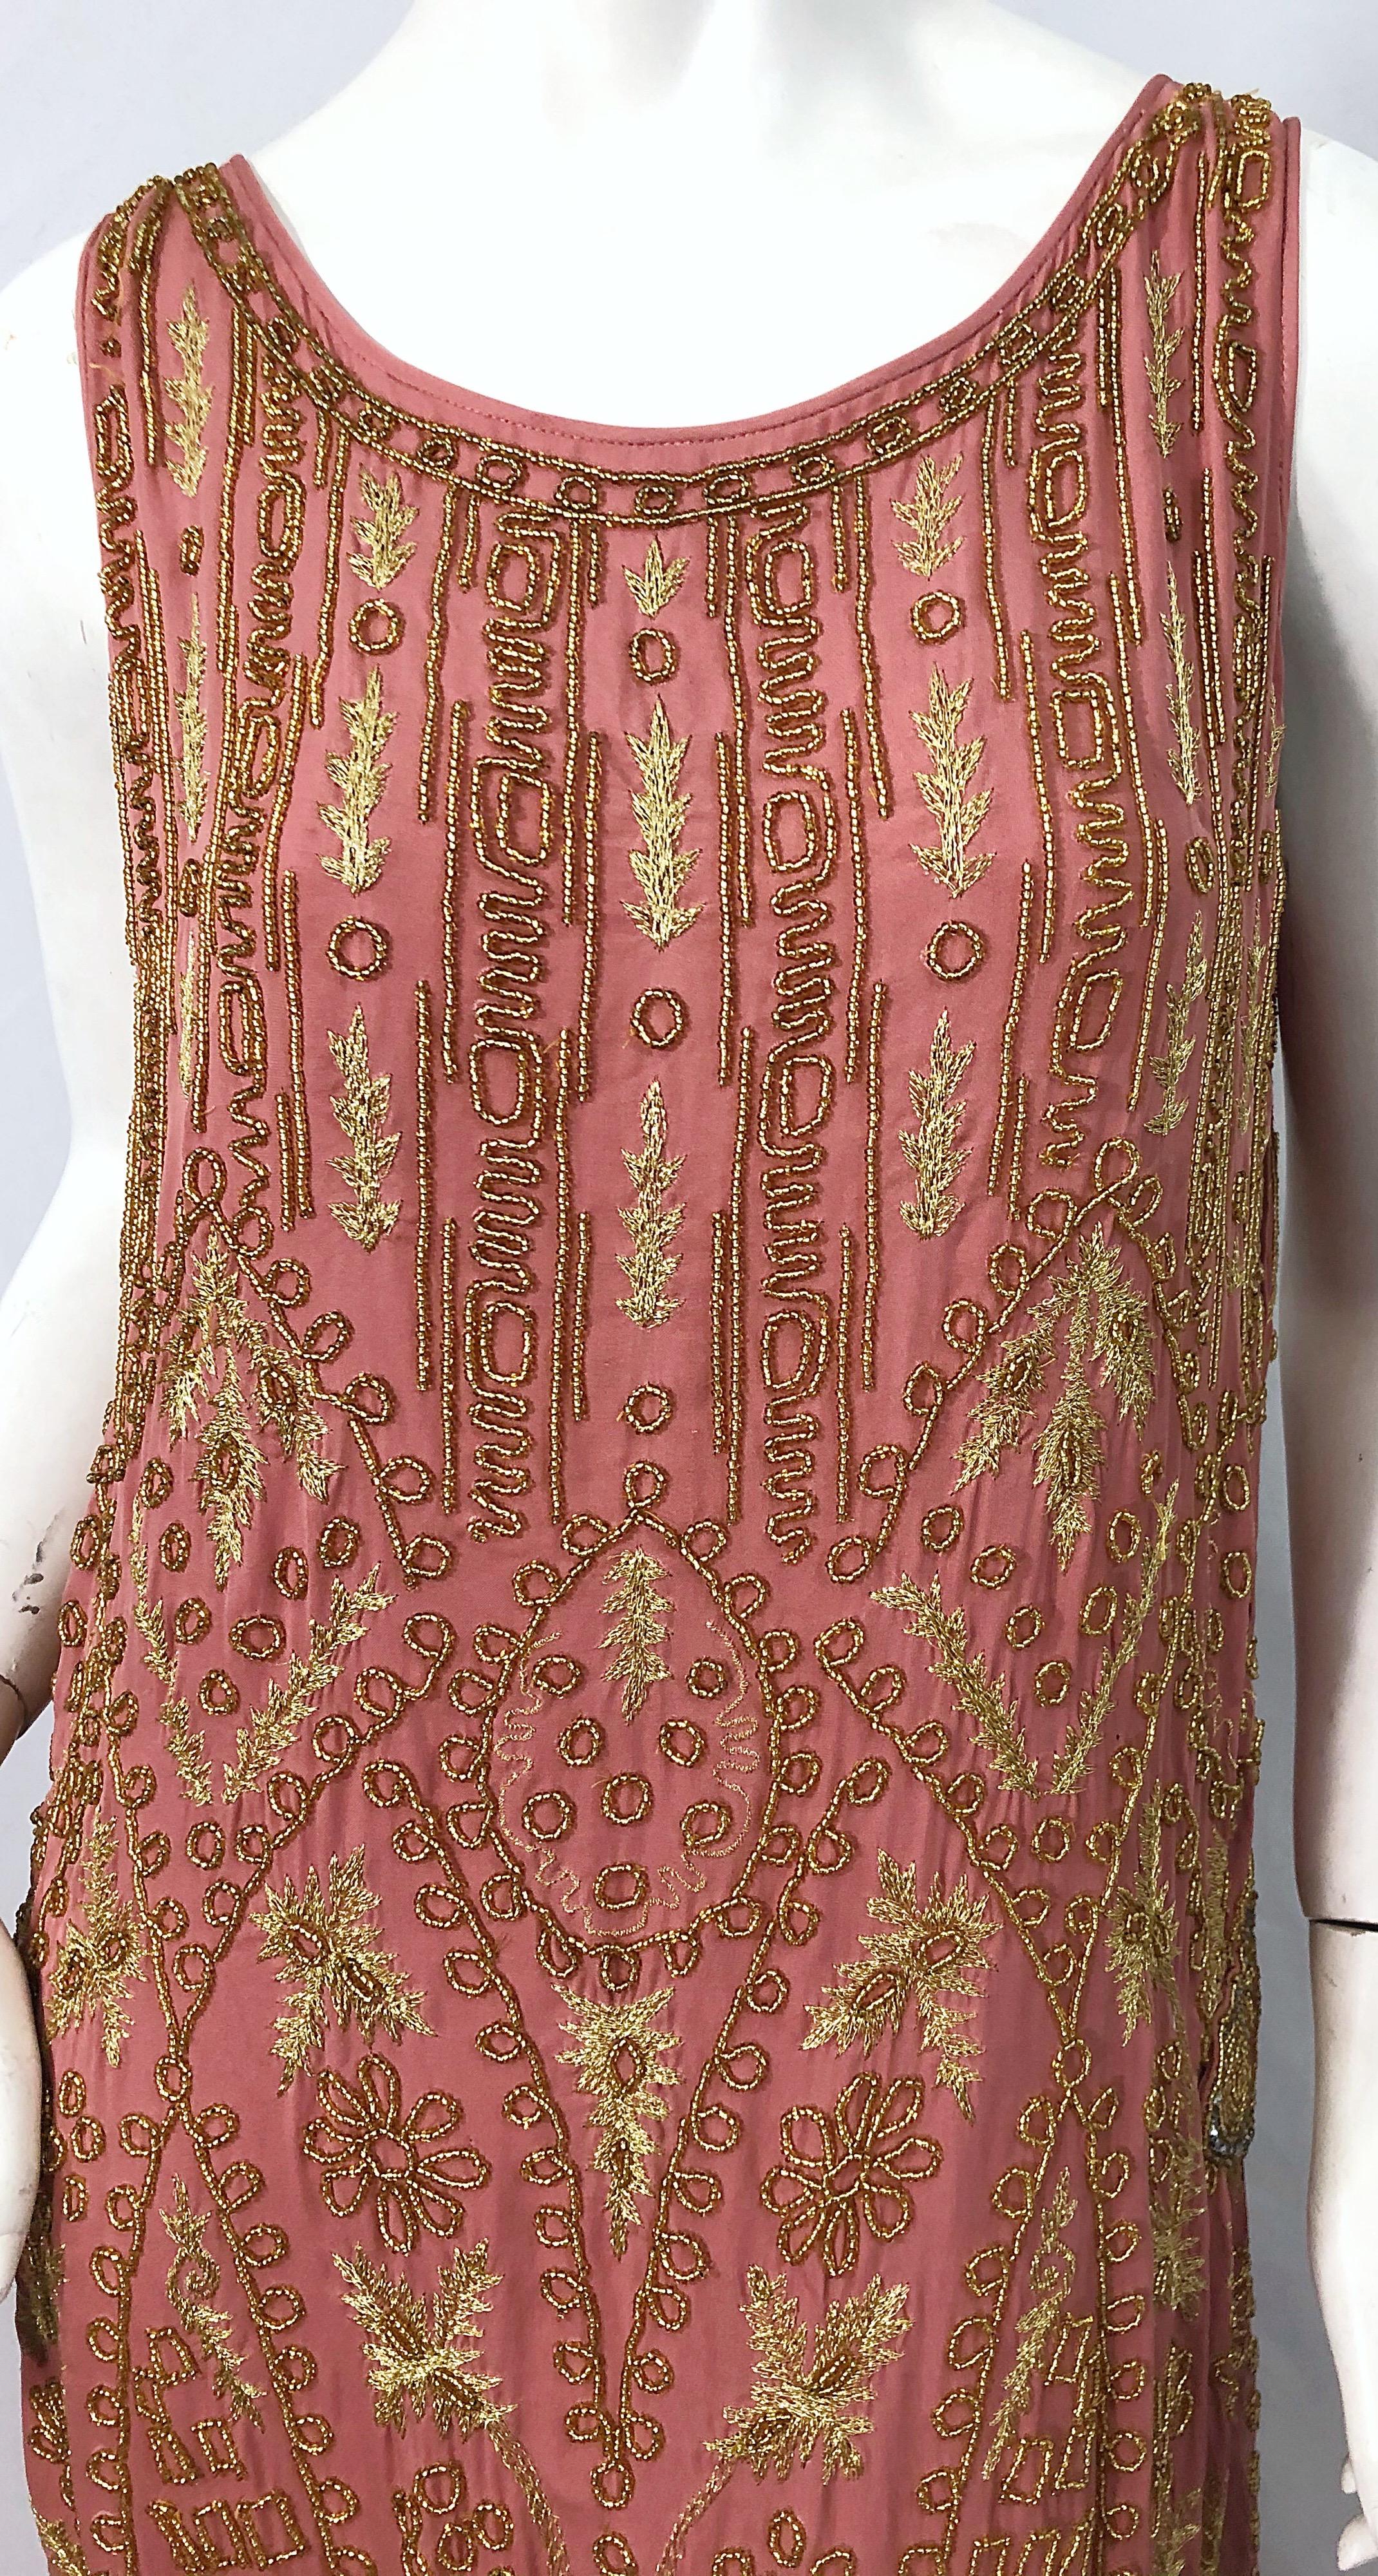 Women's 1920s French Couture Pink + Gold Beaded Gatsby Roaring 20s Vintage Flapper Dress